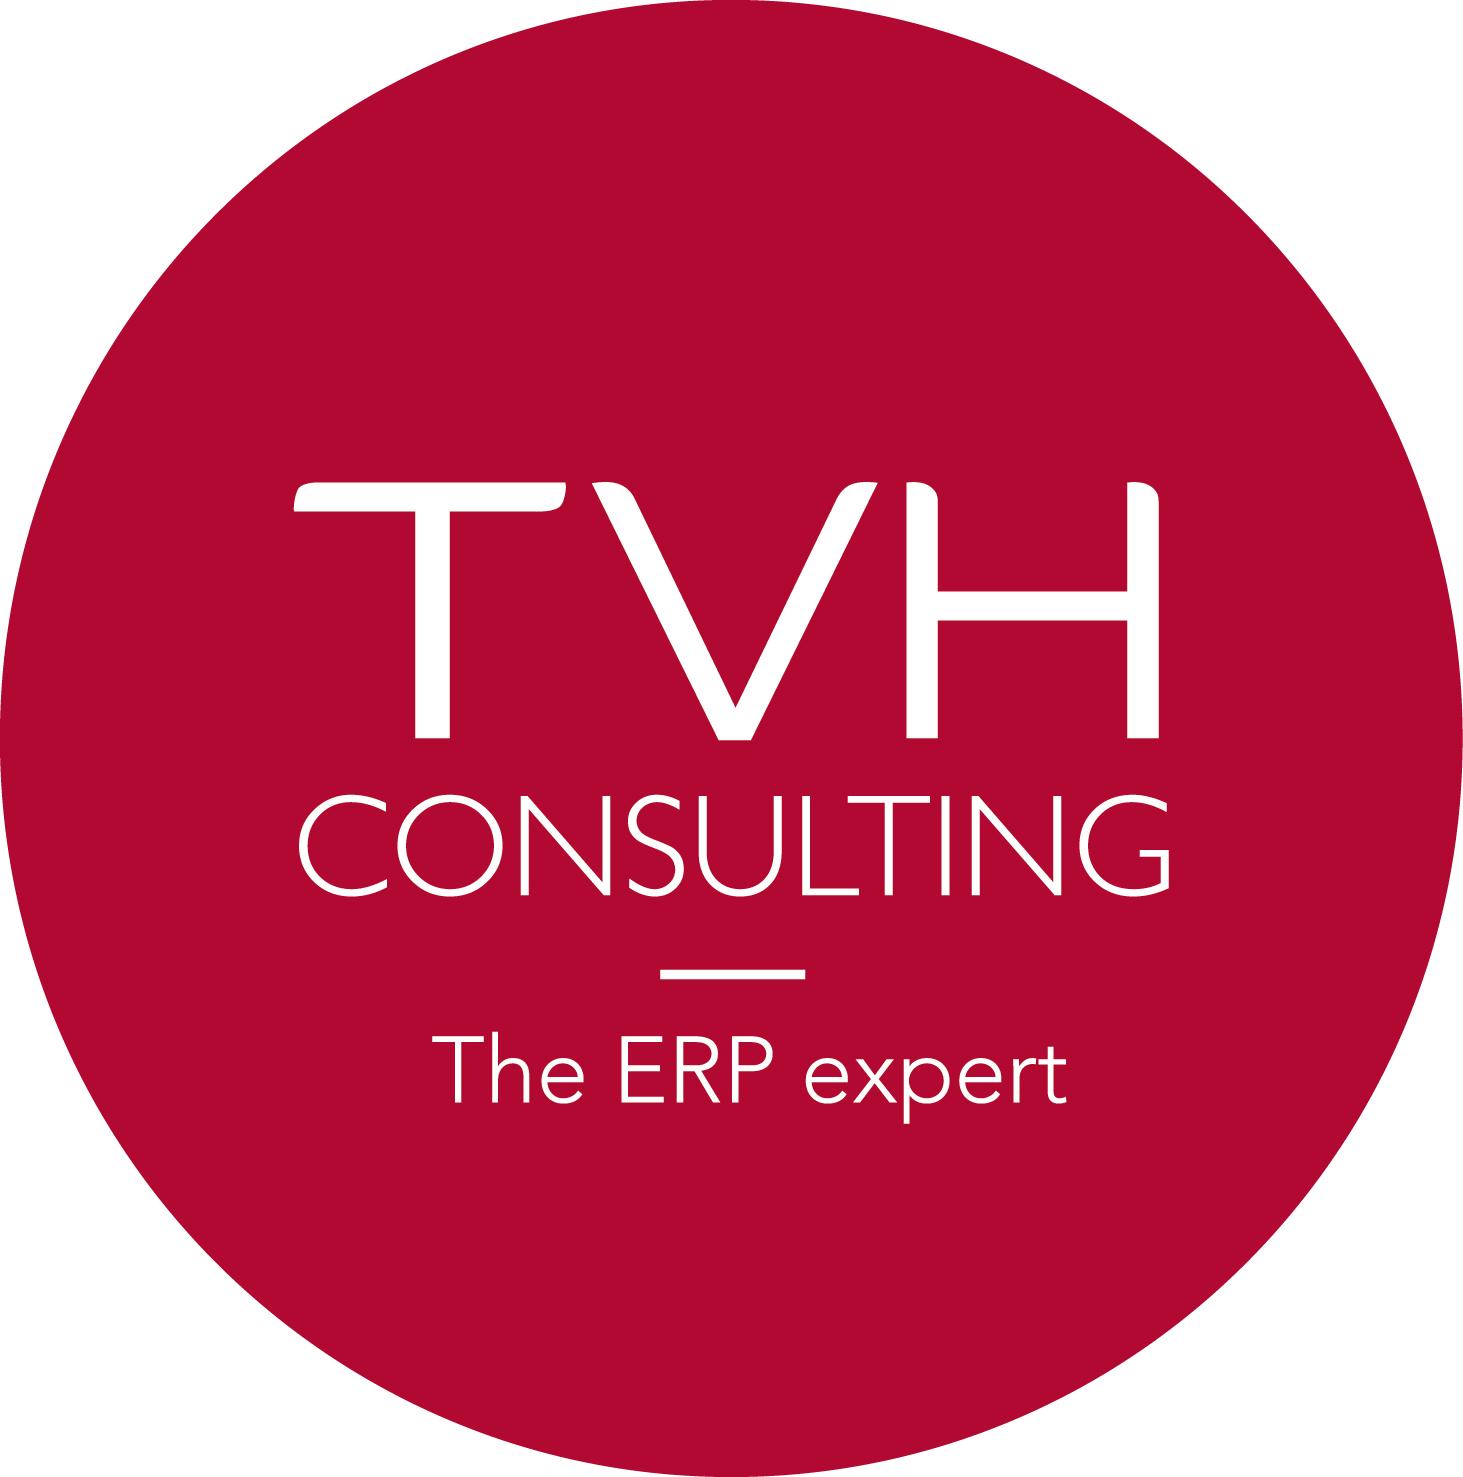 Hub 'TVH CONSULTING' - TVH Consulting